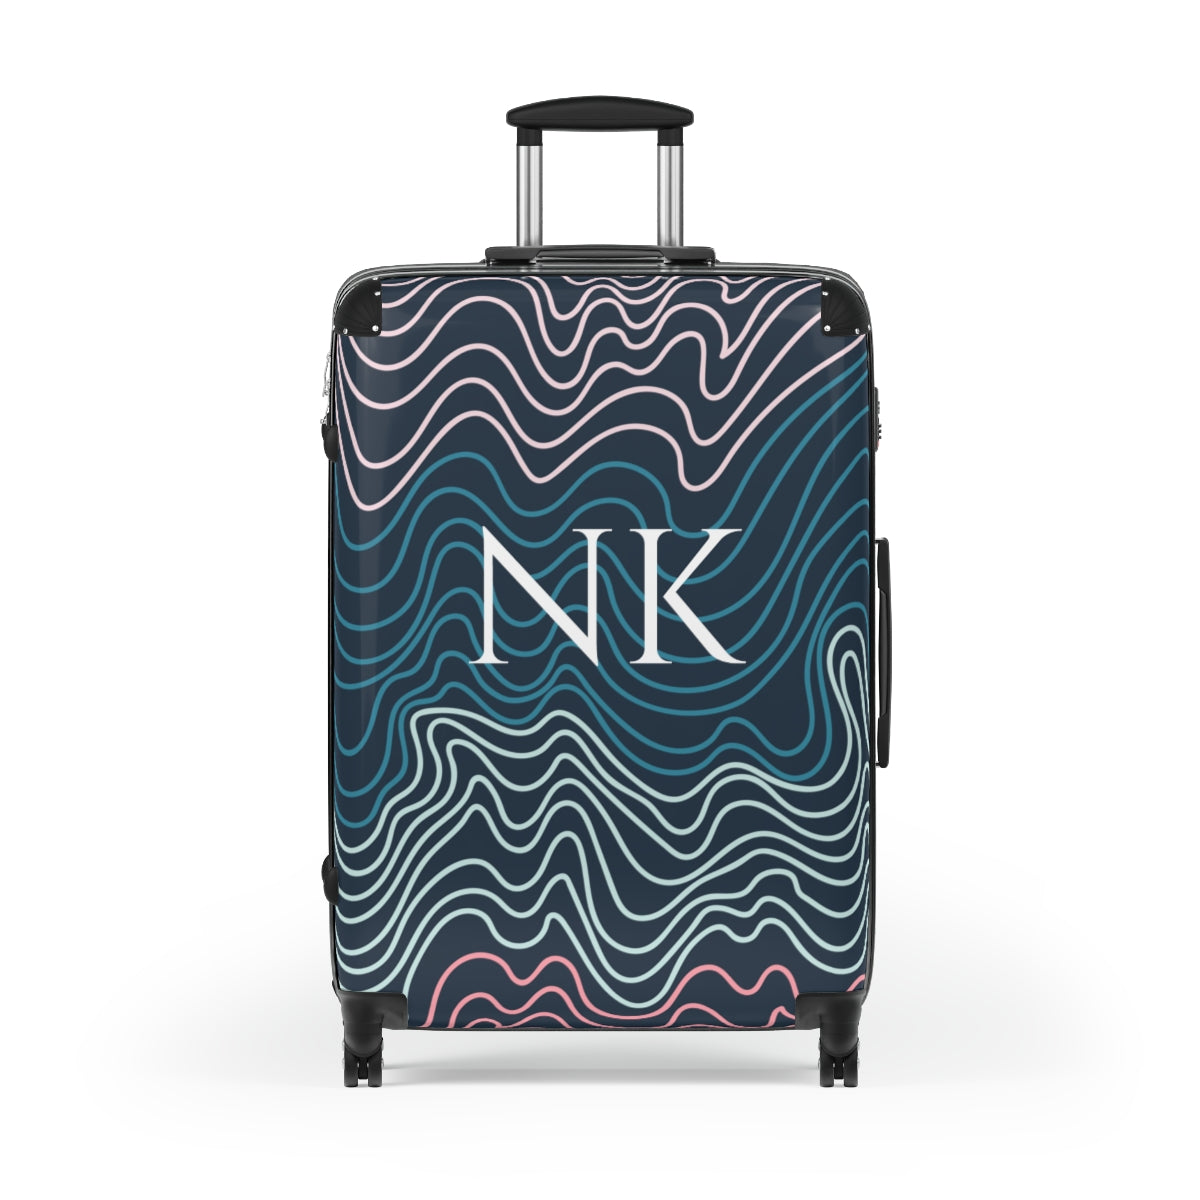 CABIN SUITCASE PERSONALISED, Carry-On for Men Boys Women, Gift for Him, Travel Bags for Men, Travel Luggage All Sizes, Holiday Bags